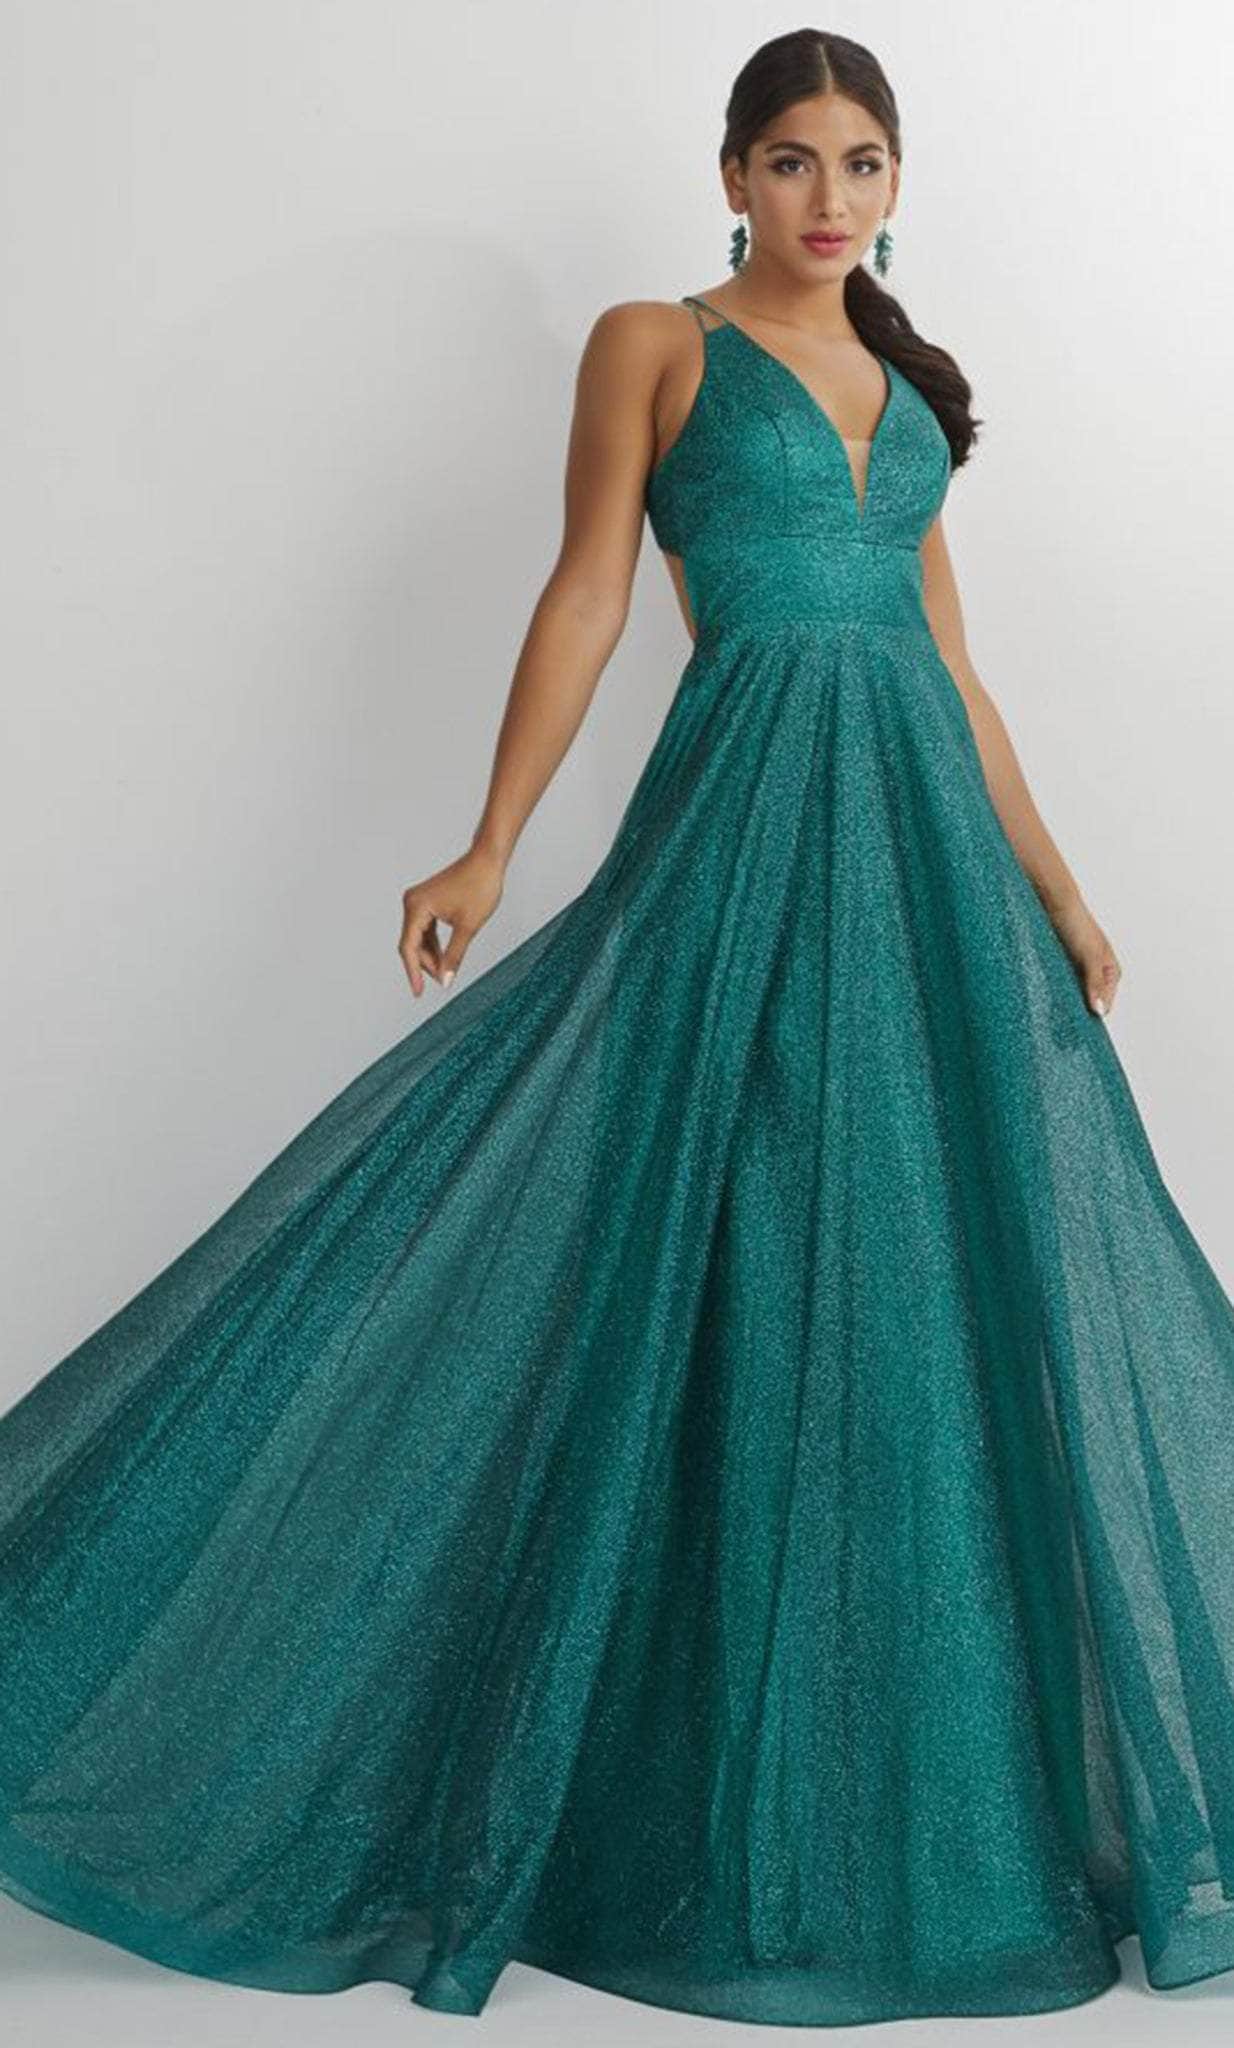 Image of Studio 17 Prom 12895 - Glittered Plunging V-Neck Prom Gown